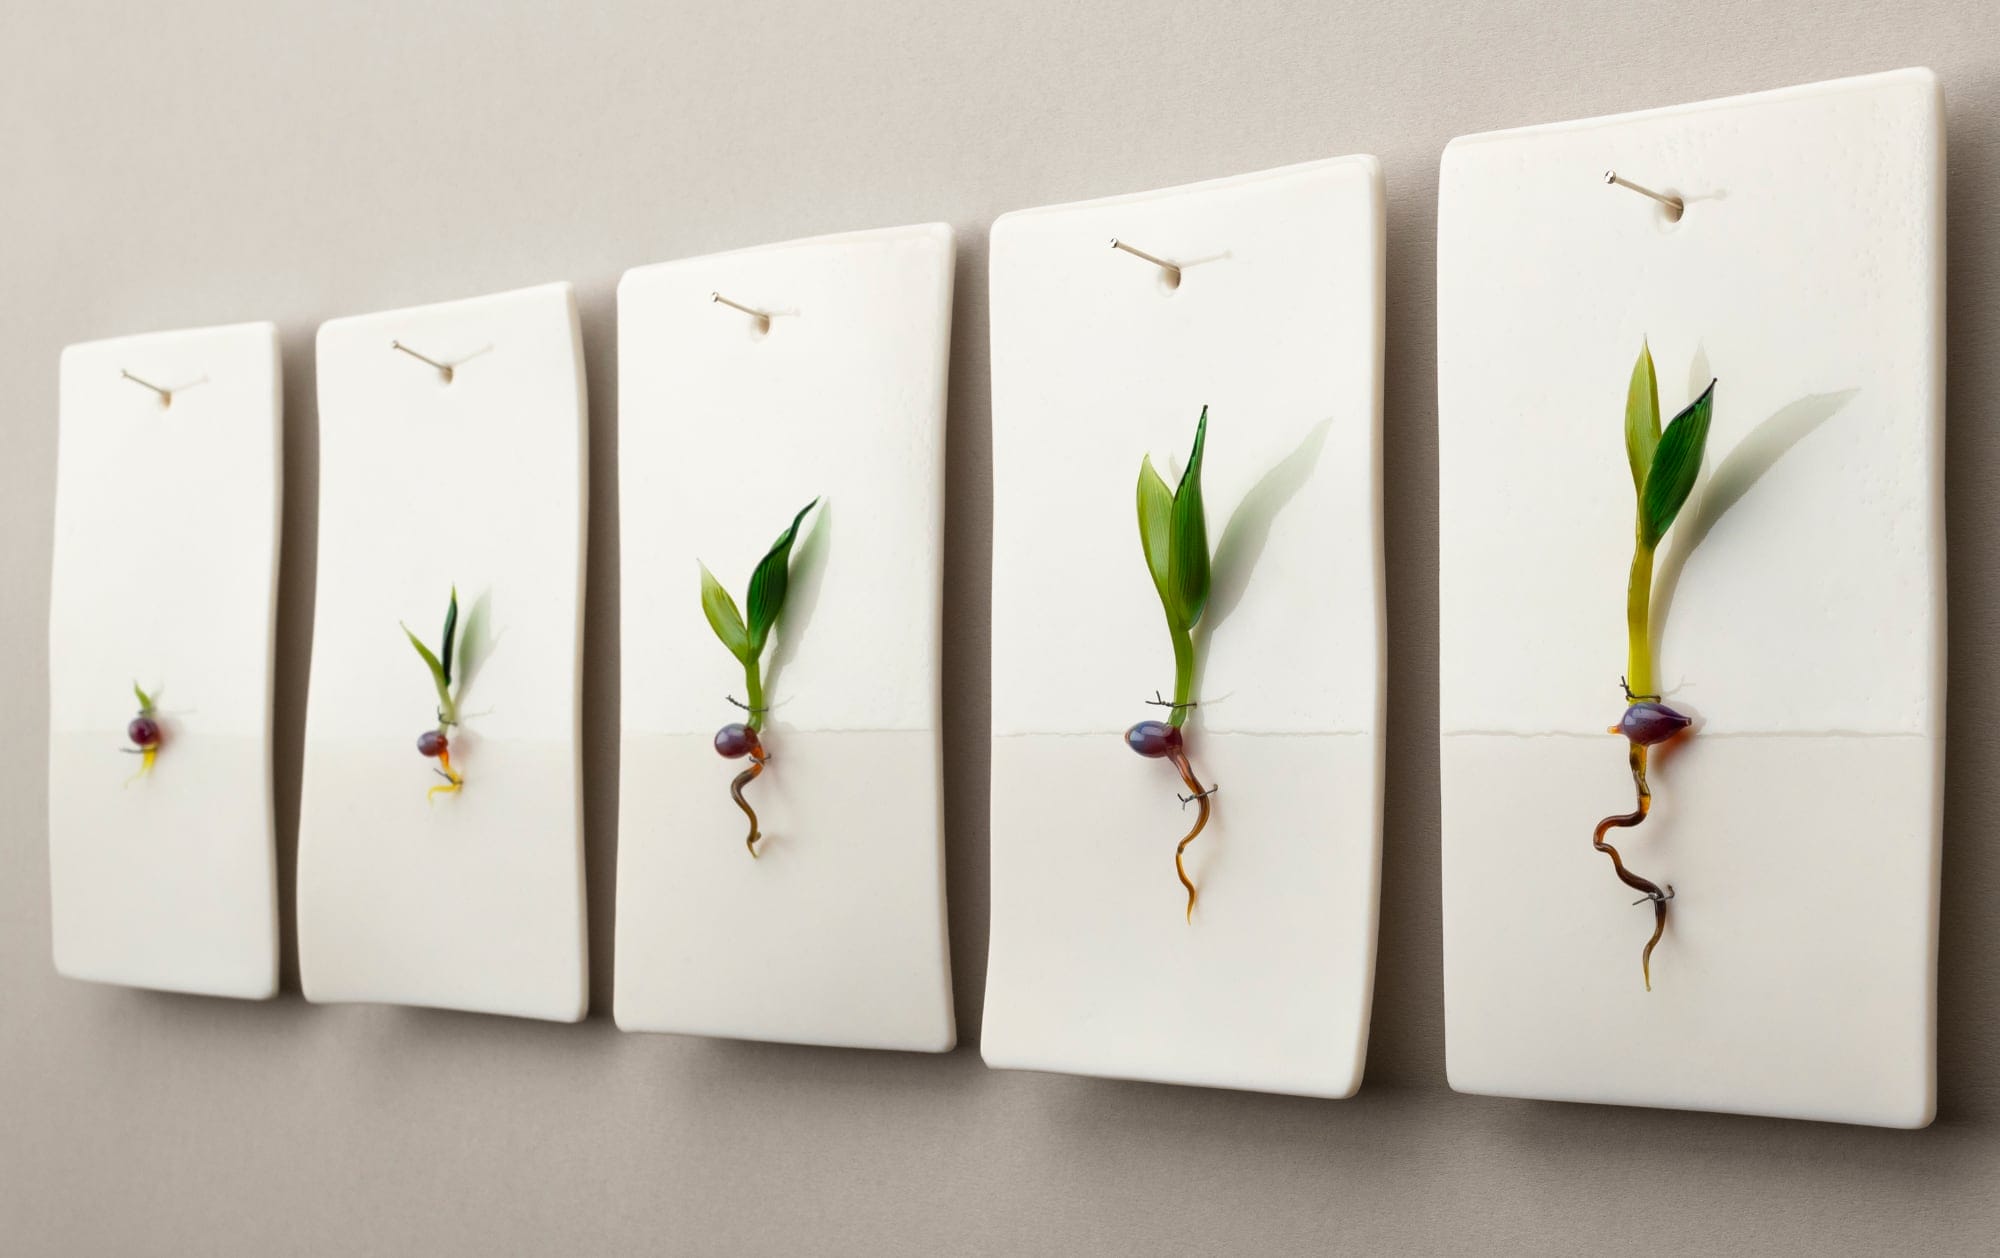 five white porcelain slabs hang on wall with small glass sprouts in their centers